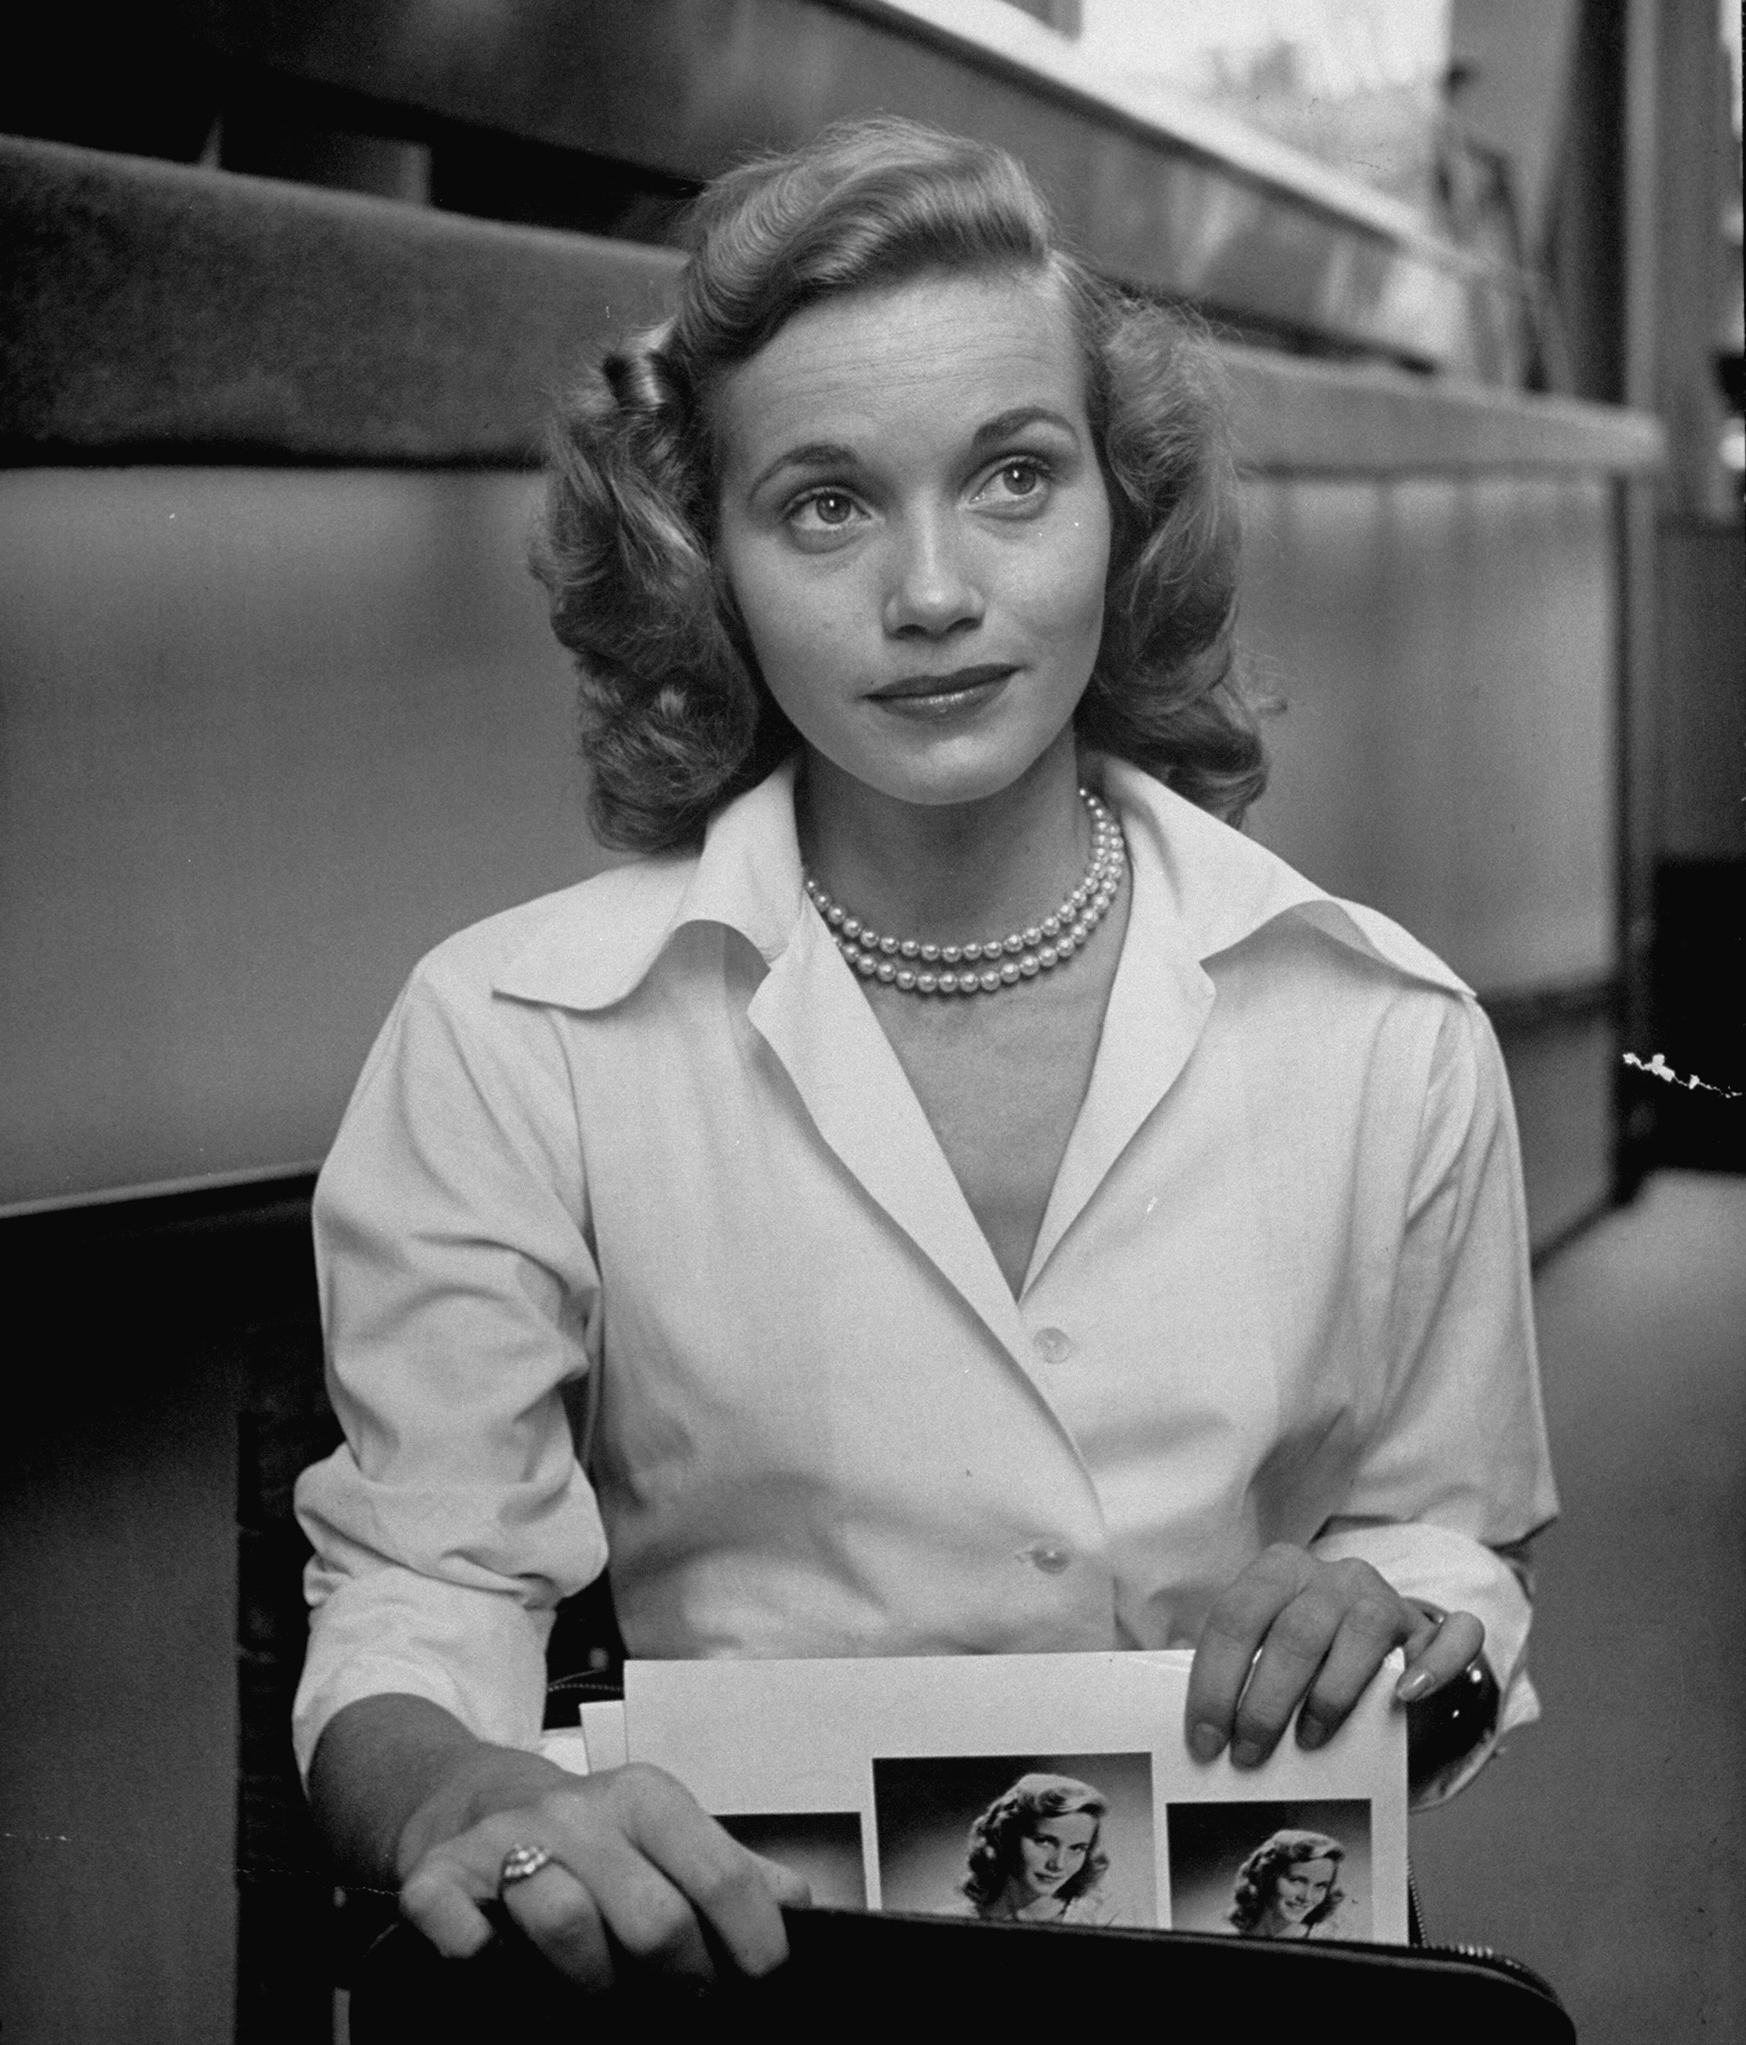 Actress Eva Maria Saint, taking her portraits and calling cards from her briefcase. (Nina Leen—The LIFE Picture Collection/Getty Images)